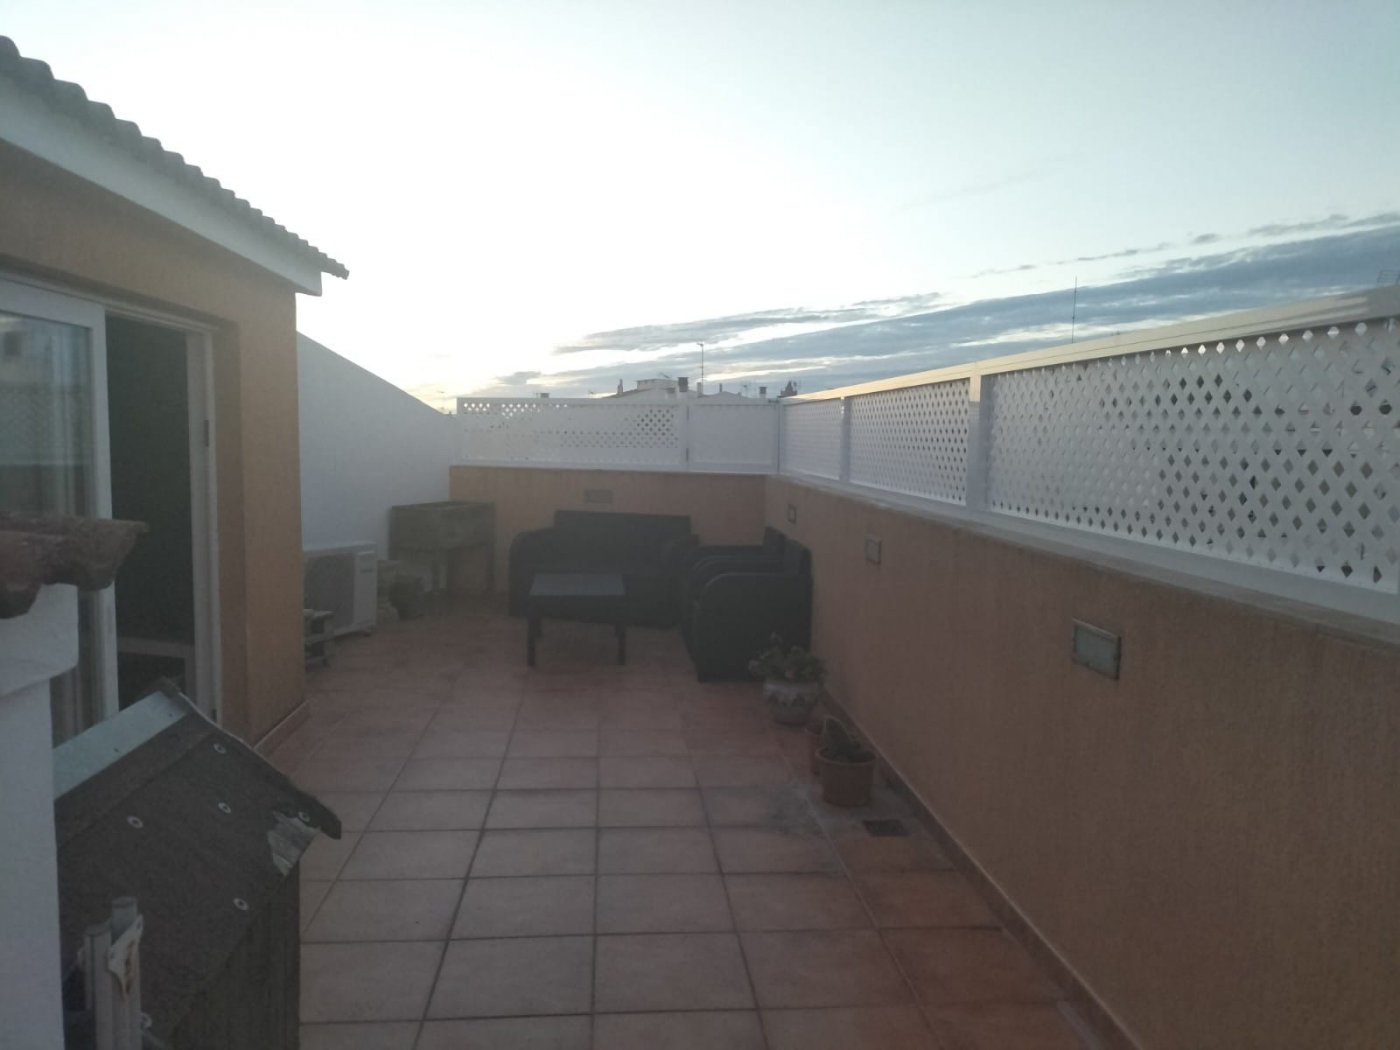 Apartment for sale in Menorca West 3